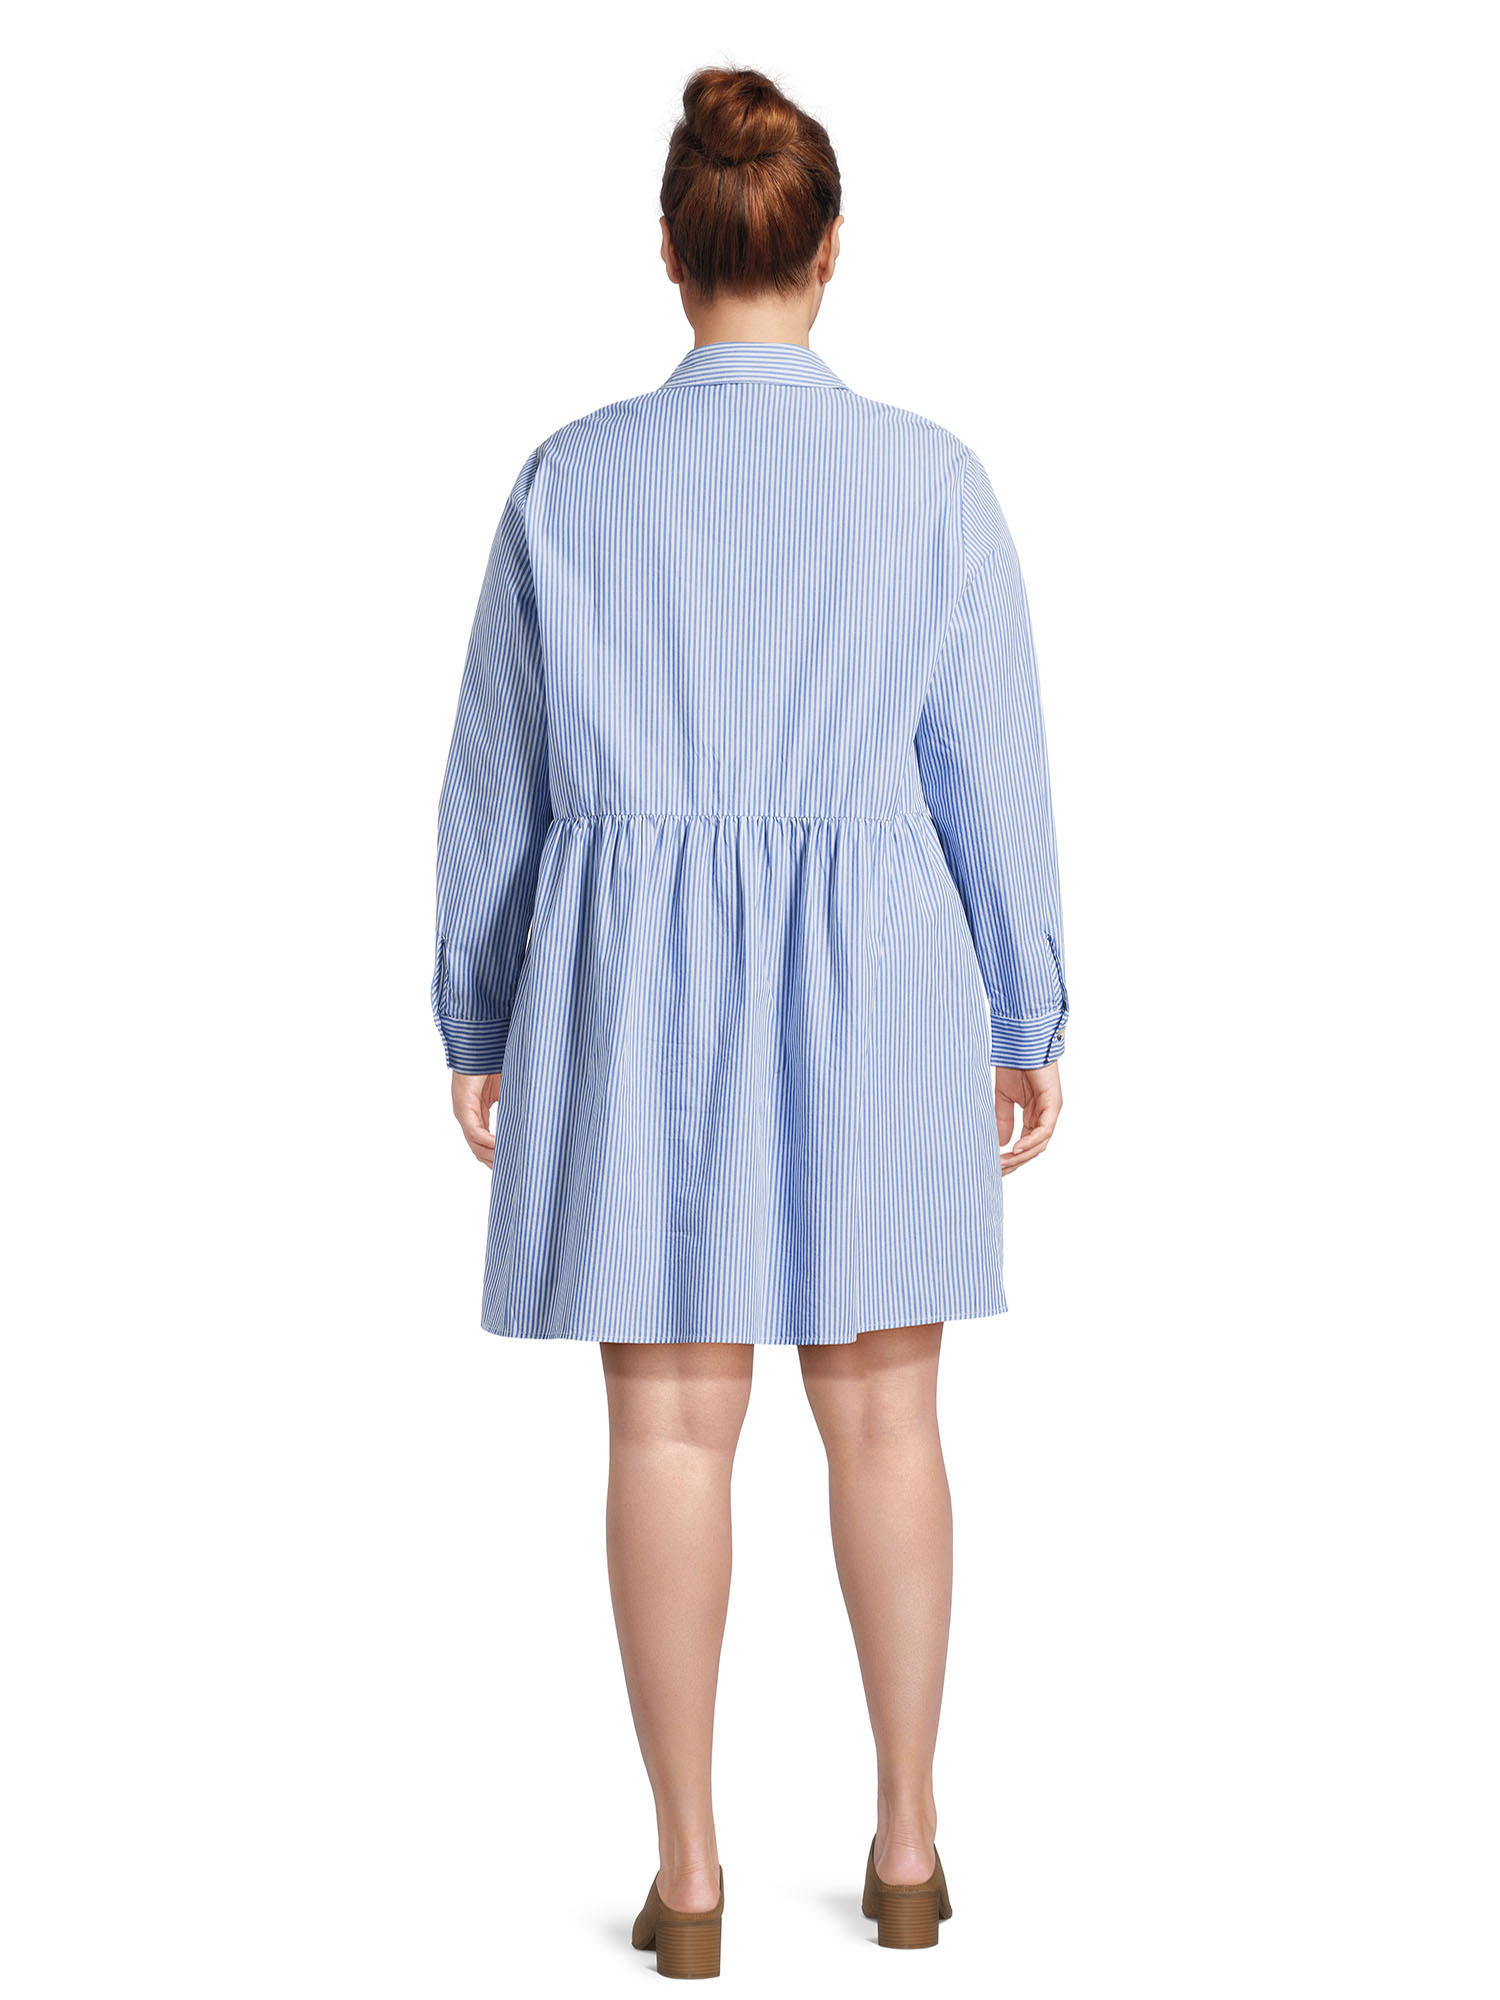 Nine.Eight Women's Plus Size Mini Shirtdress with Long Sleeves - image 4 of 6